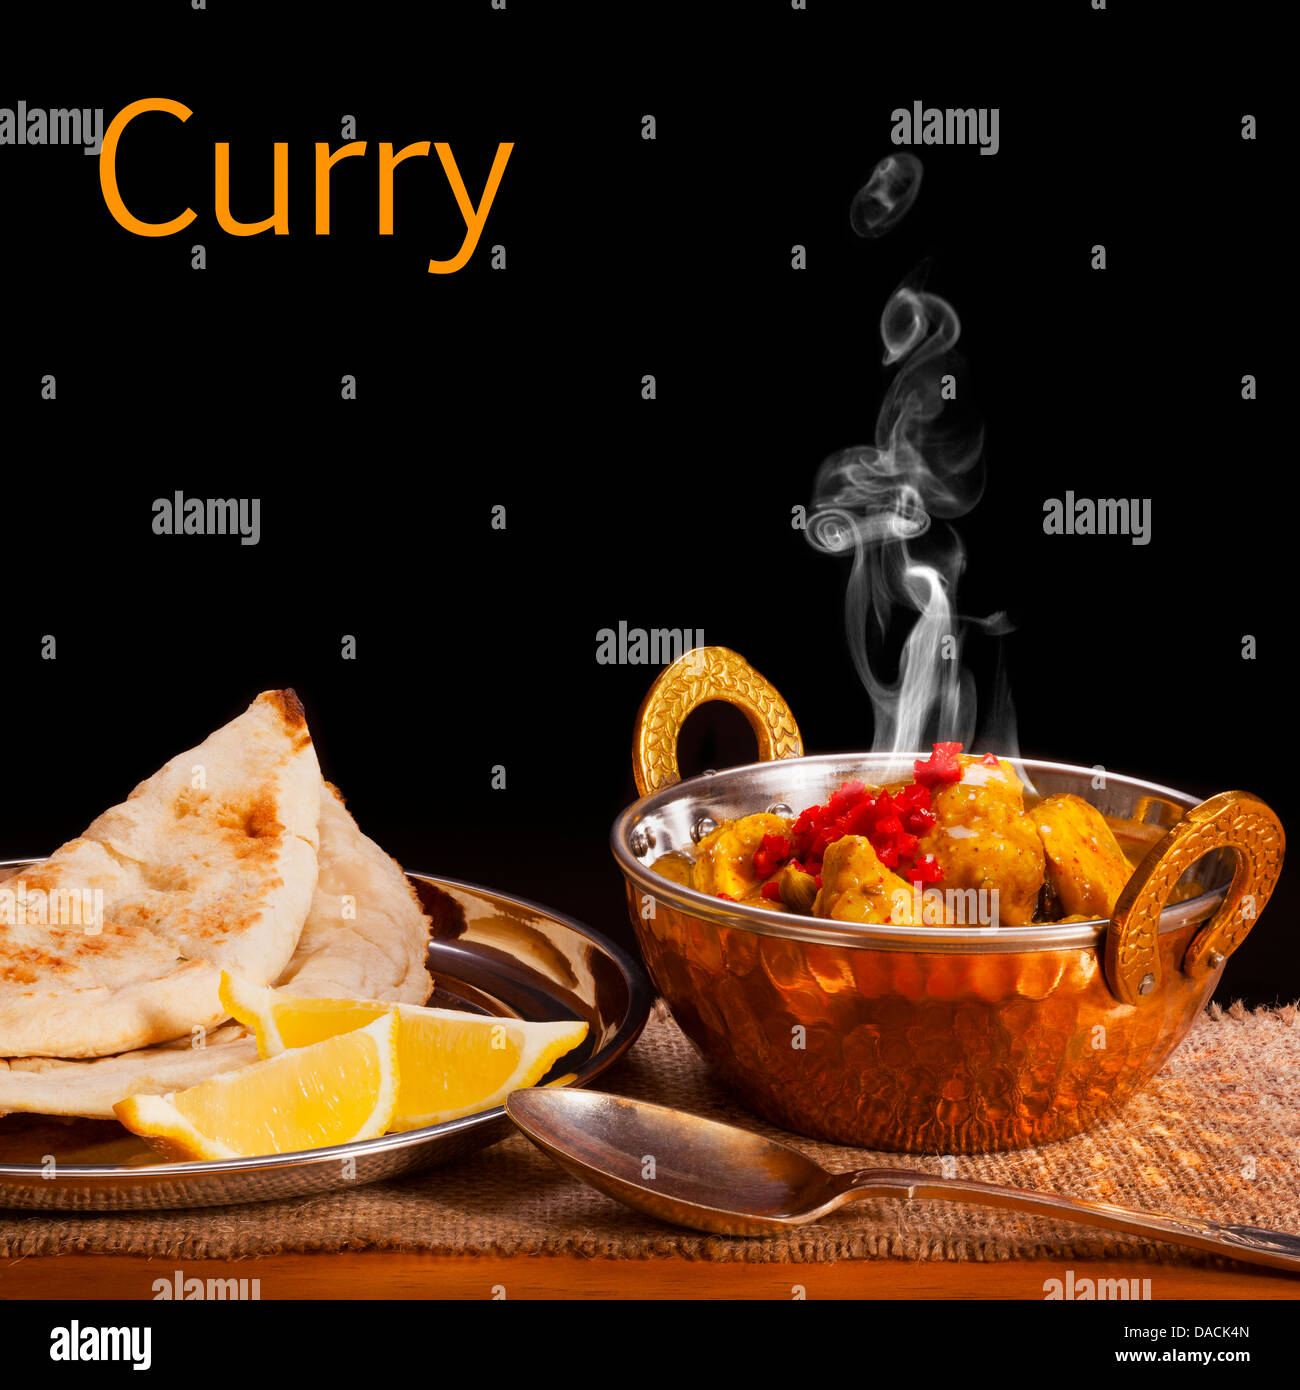 Curry Concept - a balti dish with chicken curry with visible steam rising, served with naan bread and lemon, front to back focus Stock Photo